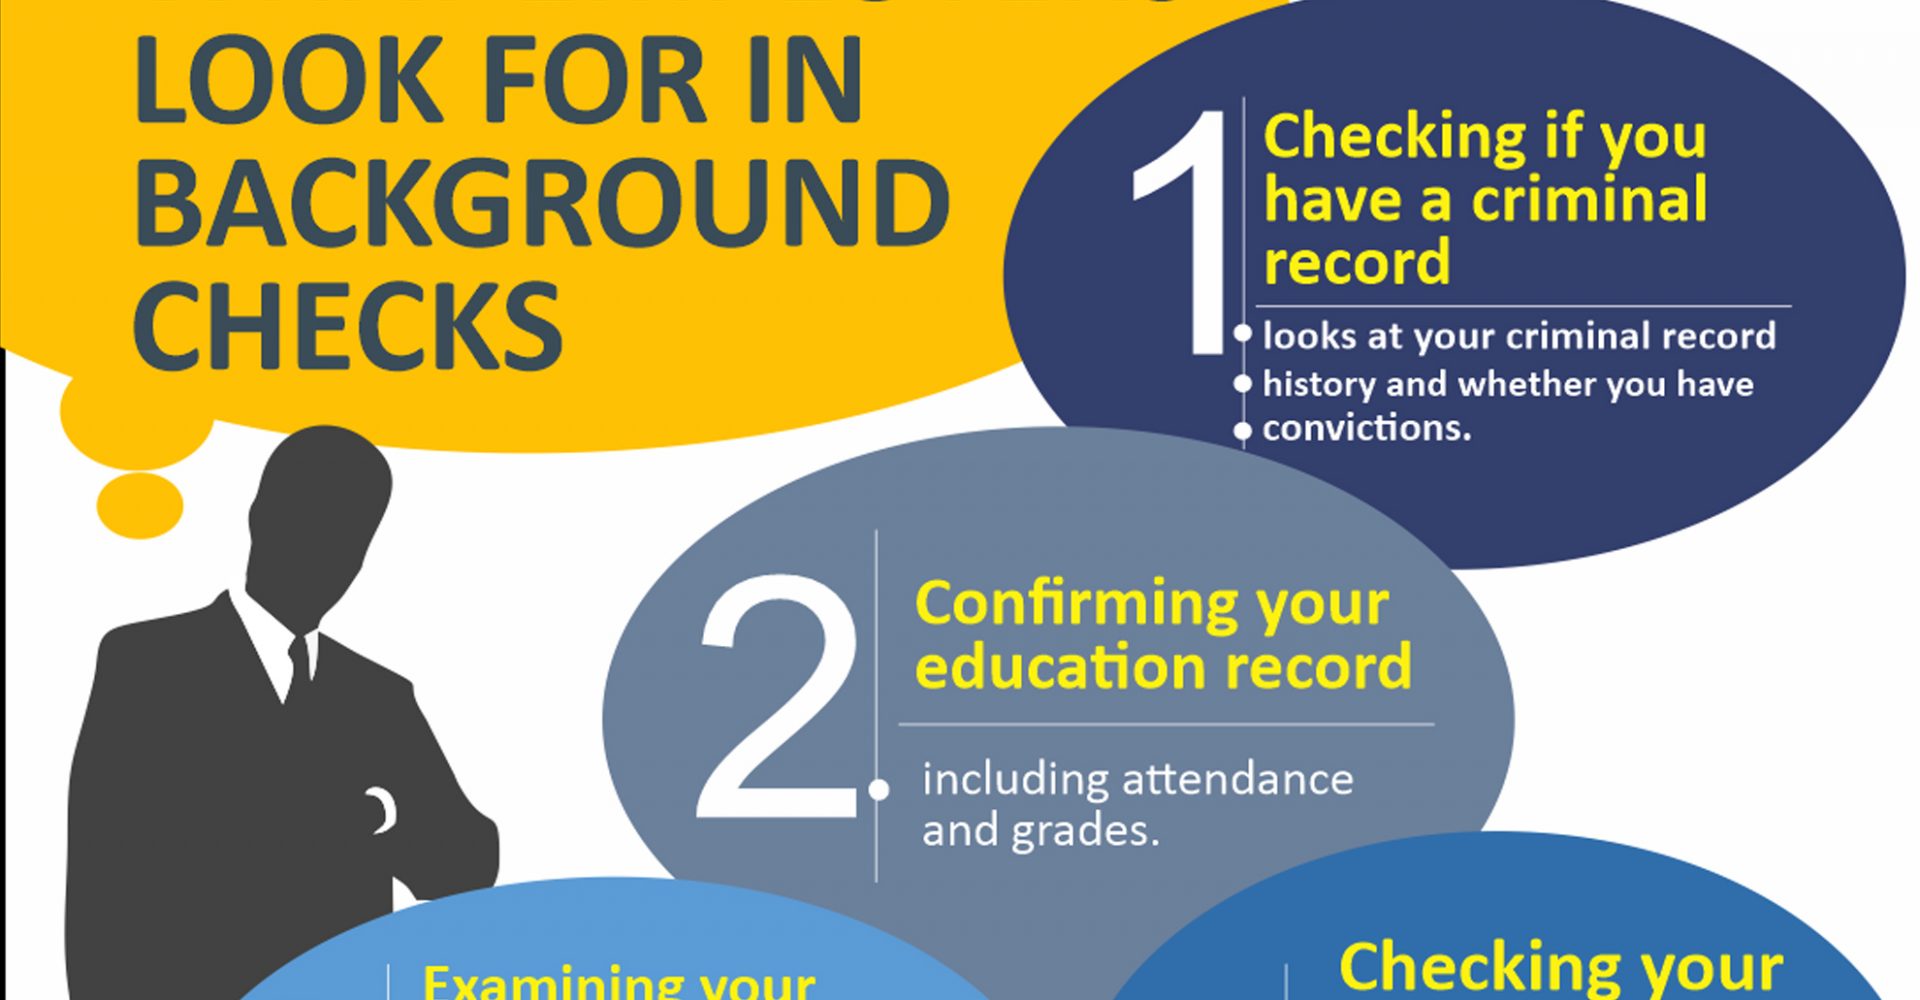 EMPLOYMENT BACKGROUND CHECK GUIDE FOR JOB APPLICANTS